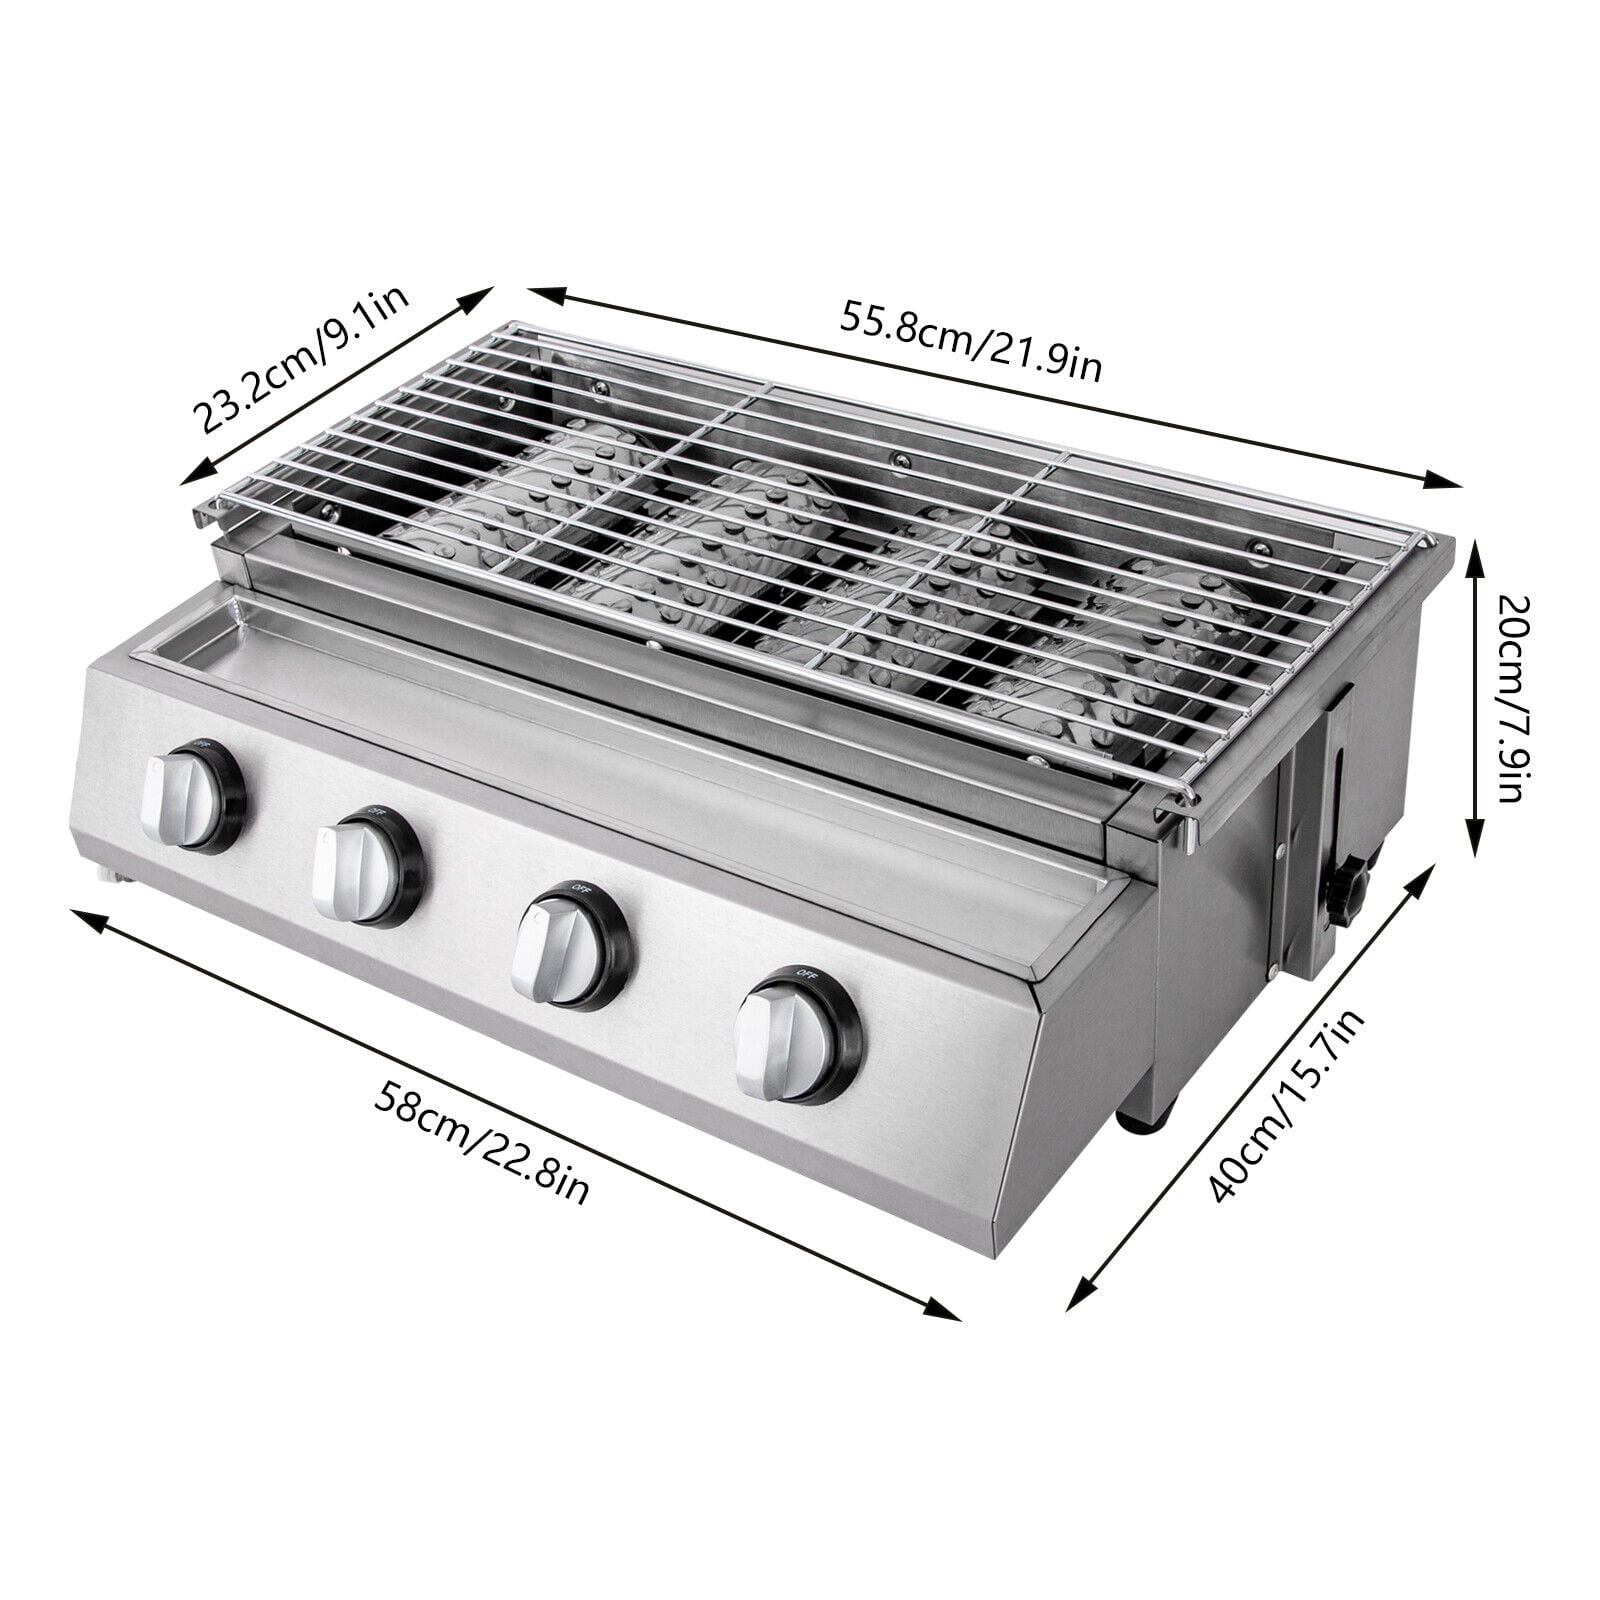 304 Stainless Steel 6 Burners Build-in Gas BBQ Grill for Outdoor Backyard  Party Barbecue in Lawn - China BBQ Grill and Barbecue Party price